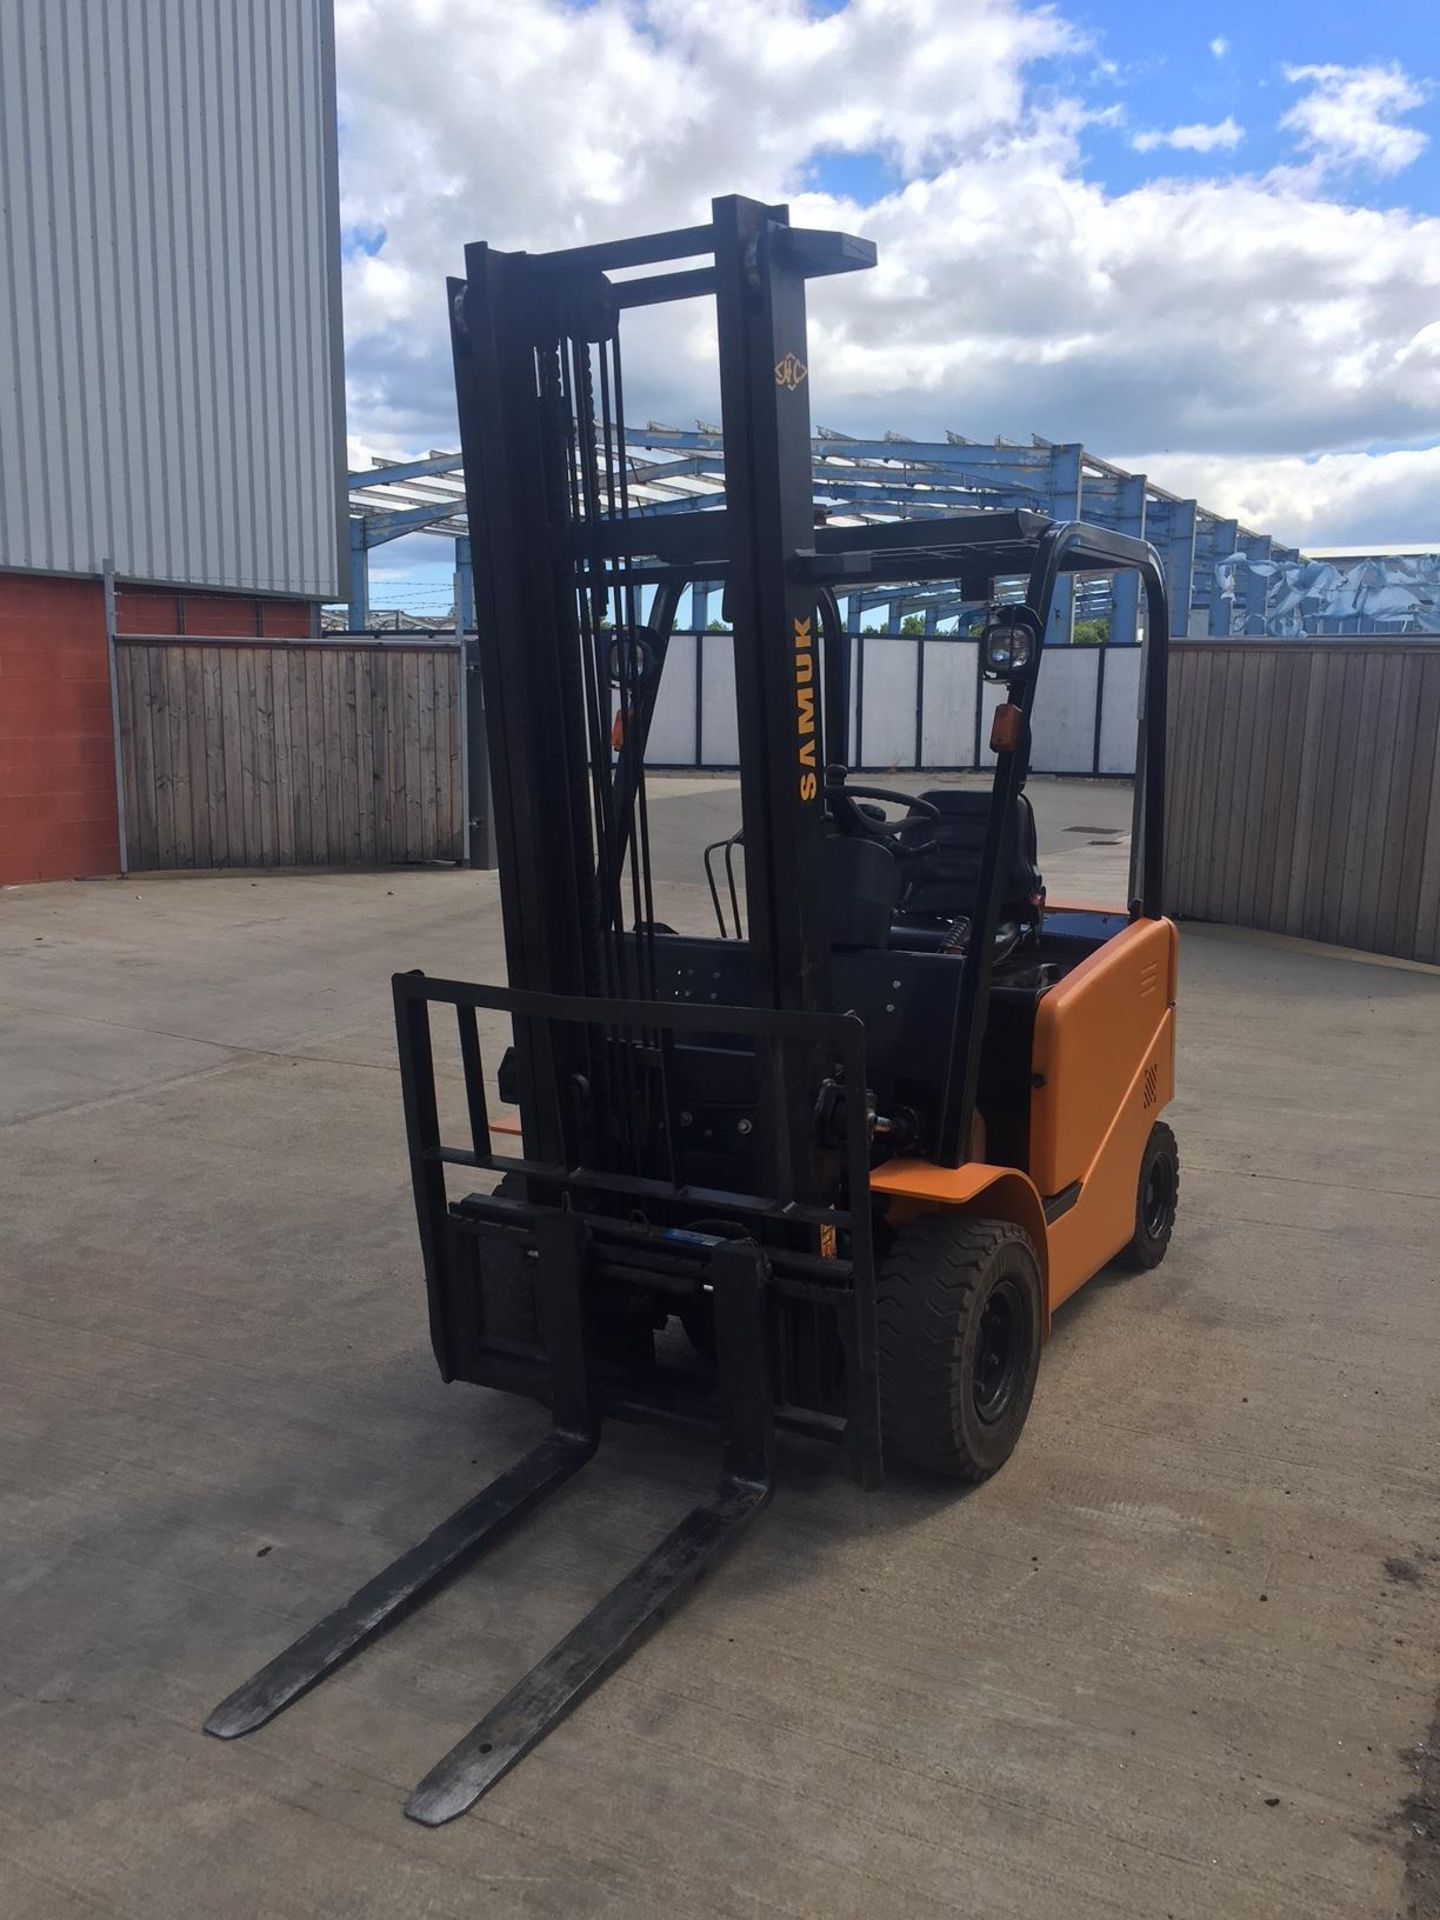 Sam-uk electric counterbalance fork lift truck - Image 5 of 9